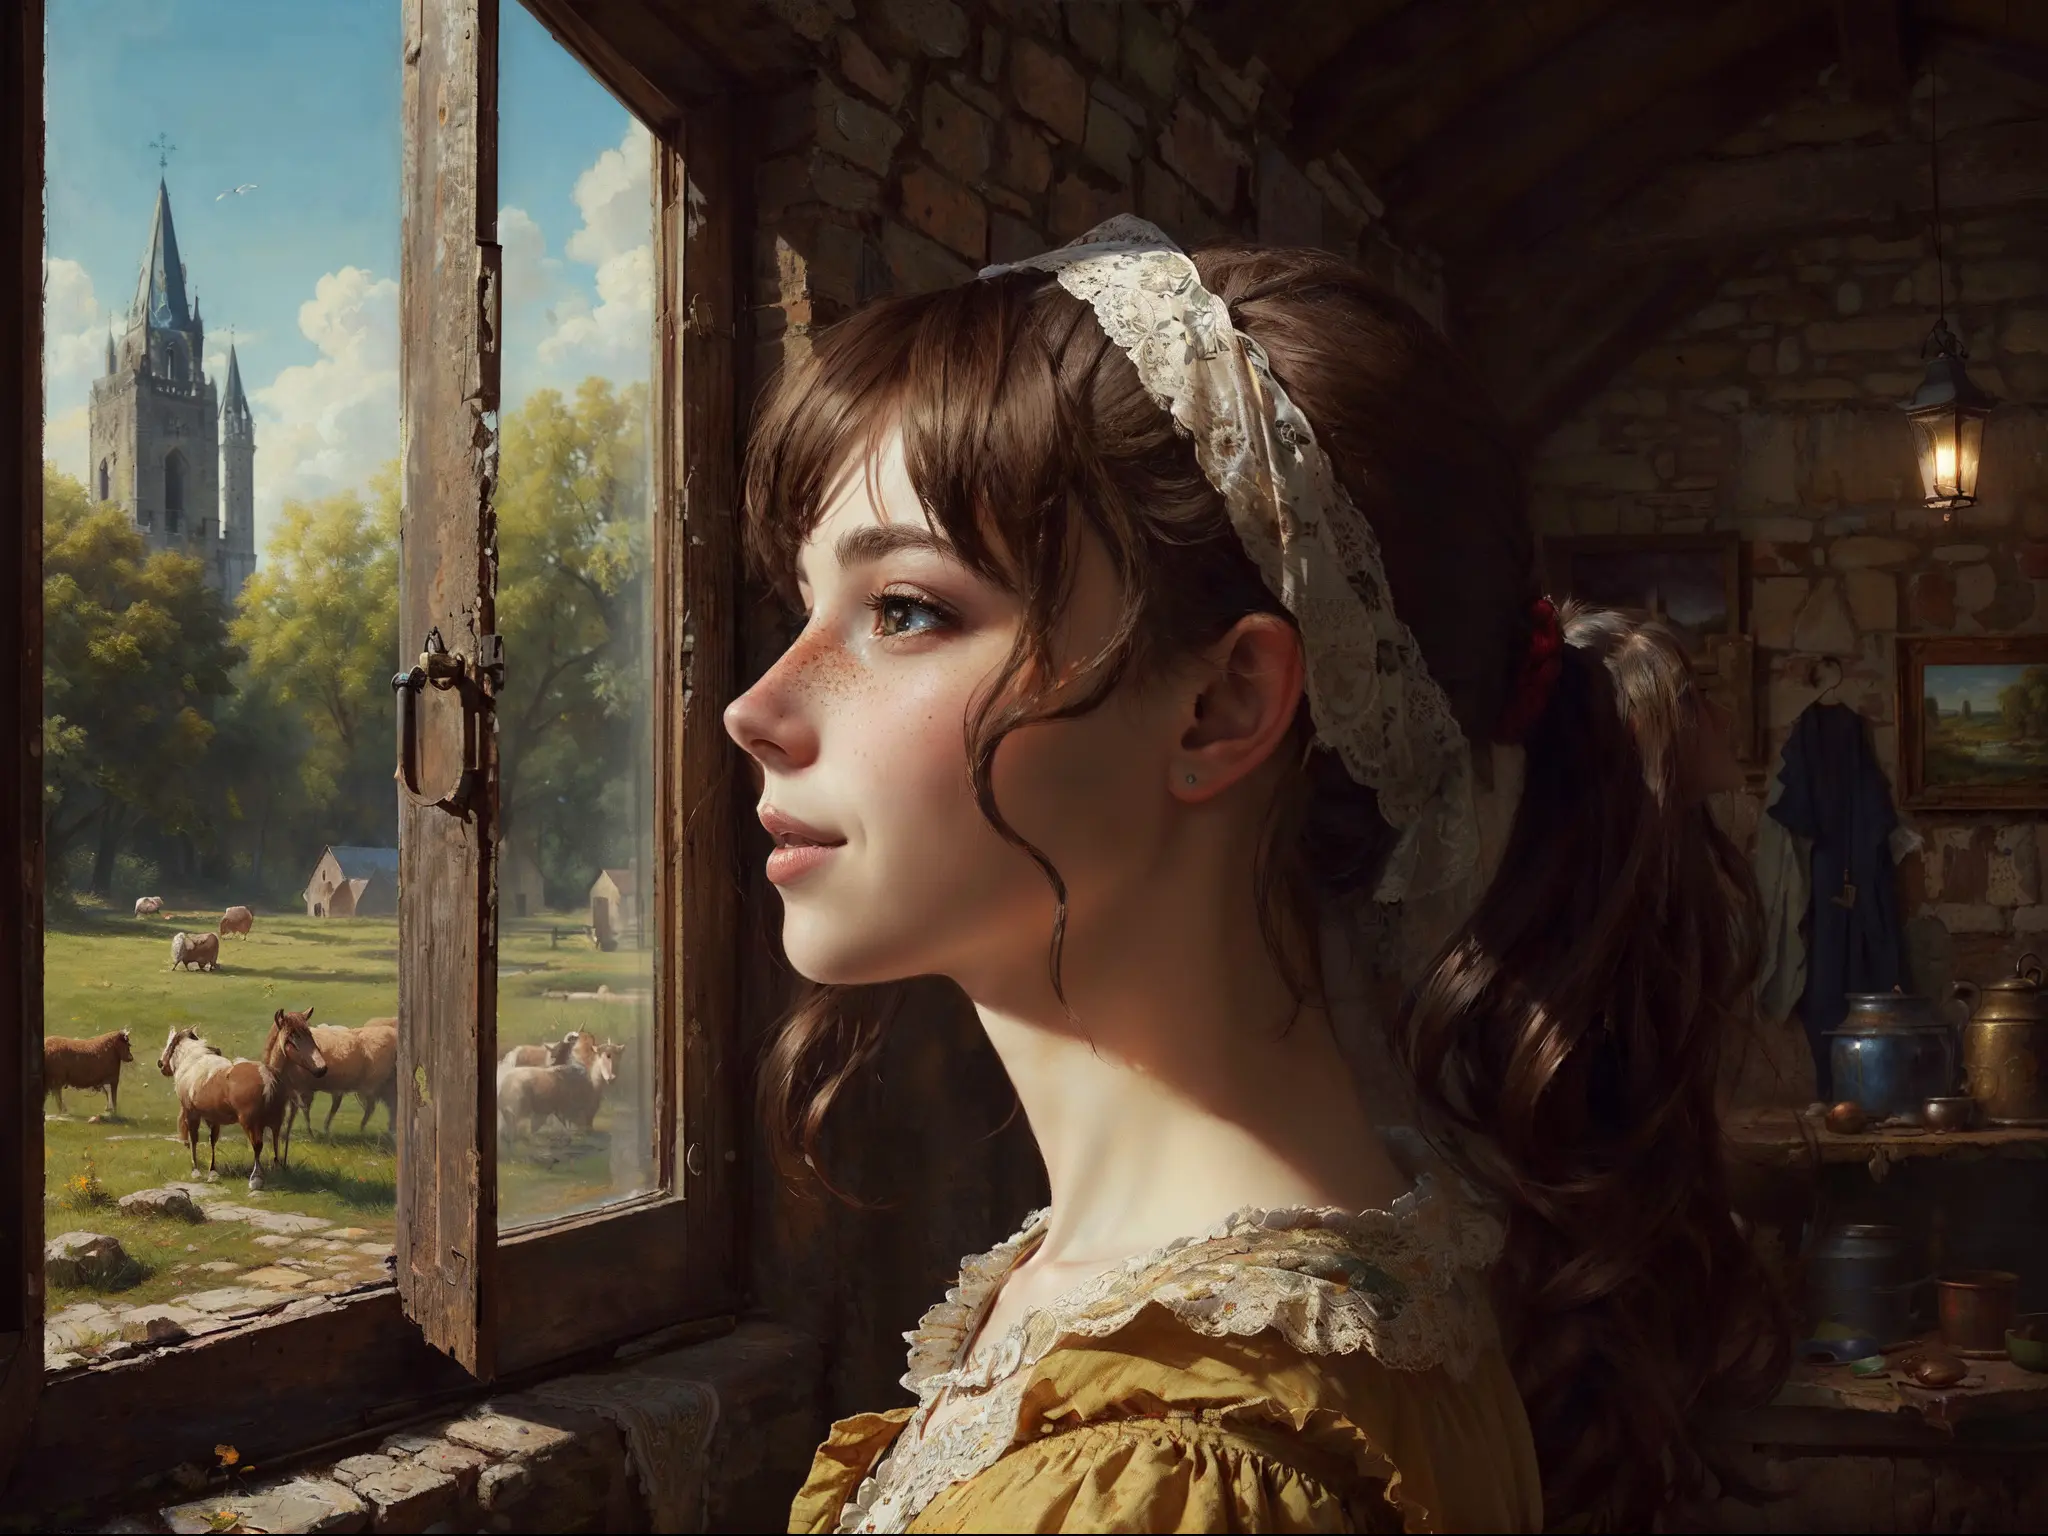 1 girl, (person [close shot]), (touching face with right hand: 1.6)
Bright eyes, (eye details), cute, flushed, (smiling), [curly hair], twin ponytails, medieval country girl hairstyle, (16 years old), medium build, [freckles]
Medieval country dress, 【turban】
Look up, look, (to the window), look into the camera
Medieval rural background, medieval rural warehouse, medieval rural windows, (environmental elements are rich), depth of field
window light, illuminating people
colorful
Master-level composition, focus on key figures,
Realism, oil painting texture, impasto texture
Masterpiece, award-winning, best quality, masterpiece, ultra detailed, hires, 8K, extremely detailed CG unity 8k wallpaper, intricate, highly detailed, realistic
Art by Ivan I. Shishkin